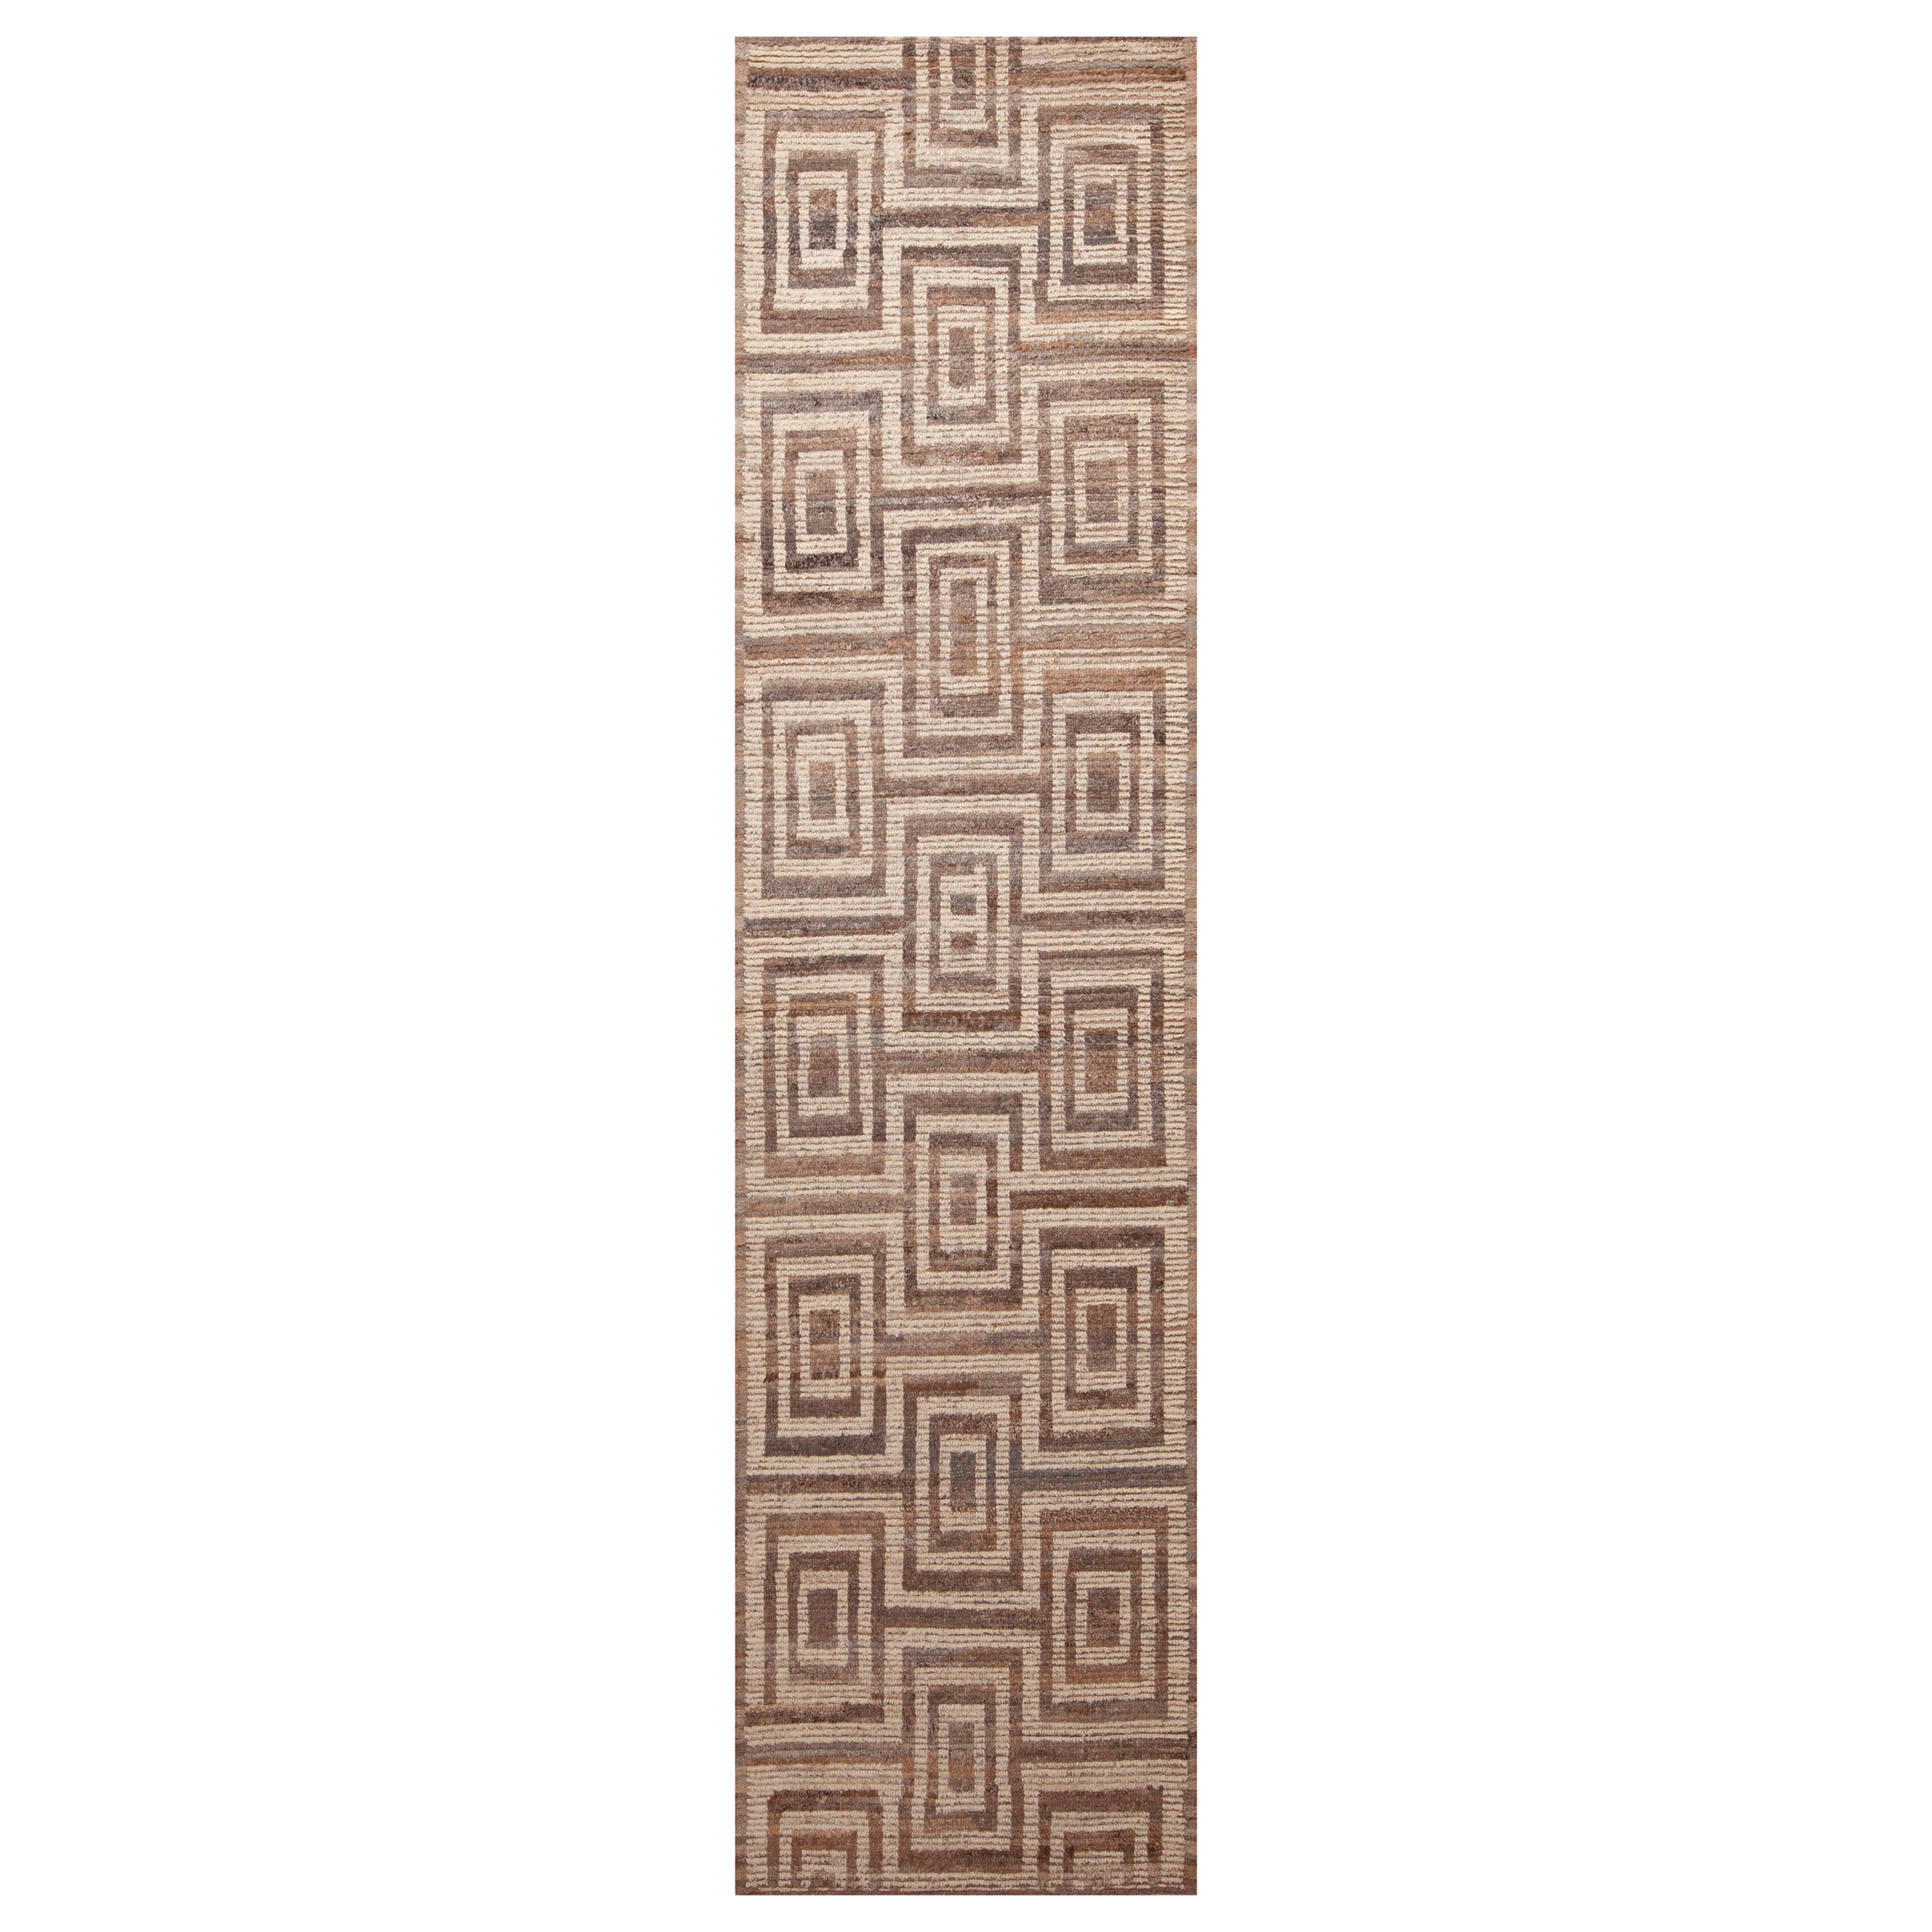 Nazmiyal Collection Modern Neutral Tribal Geometric Runner Rug 3'4" x 13' For Sale